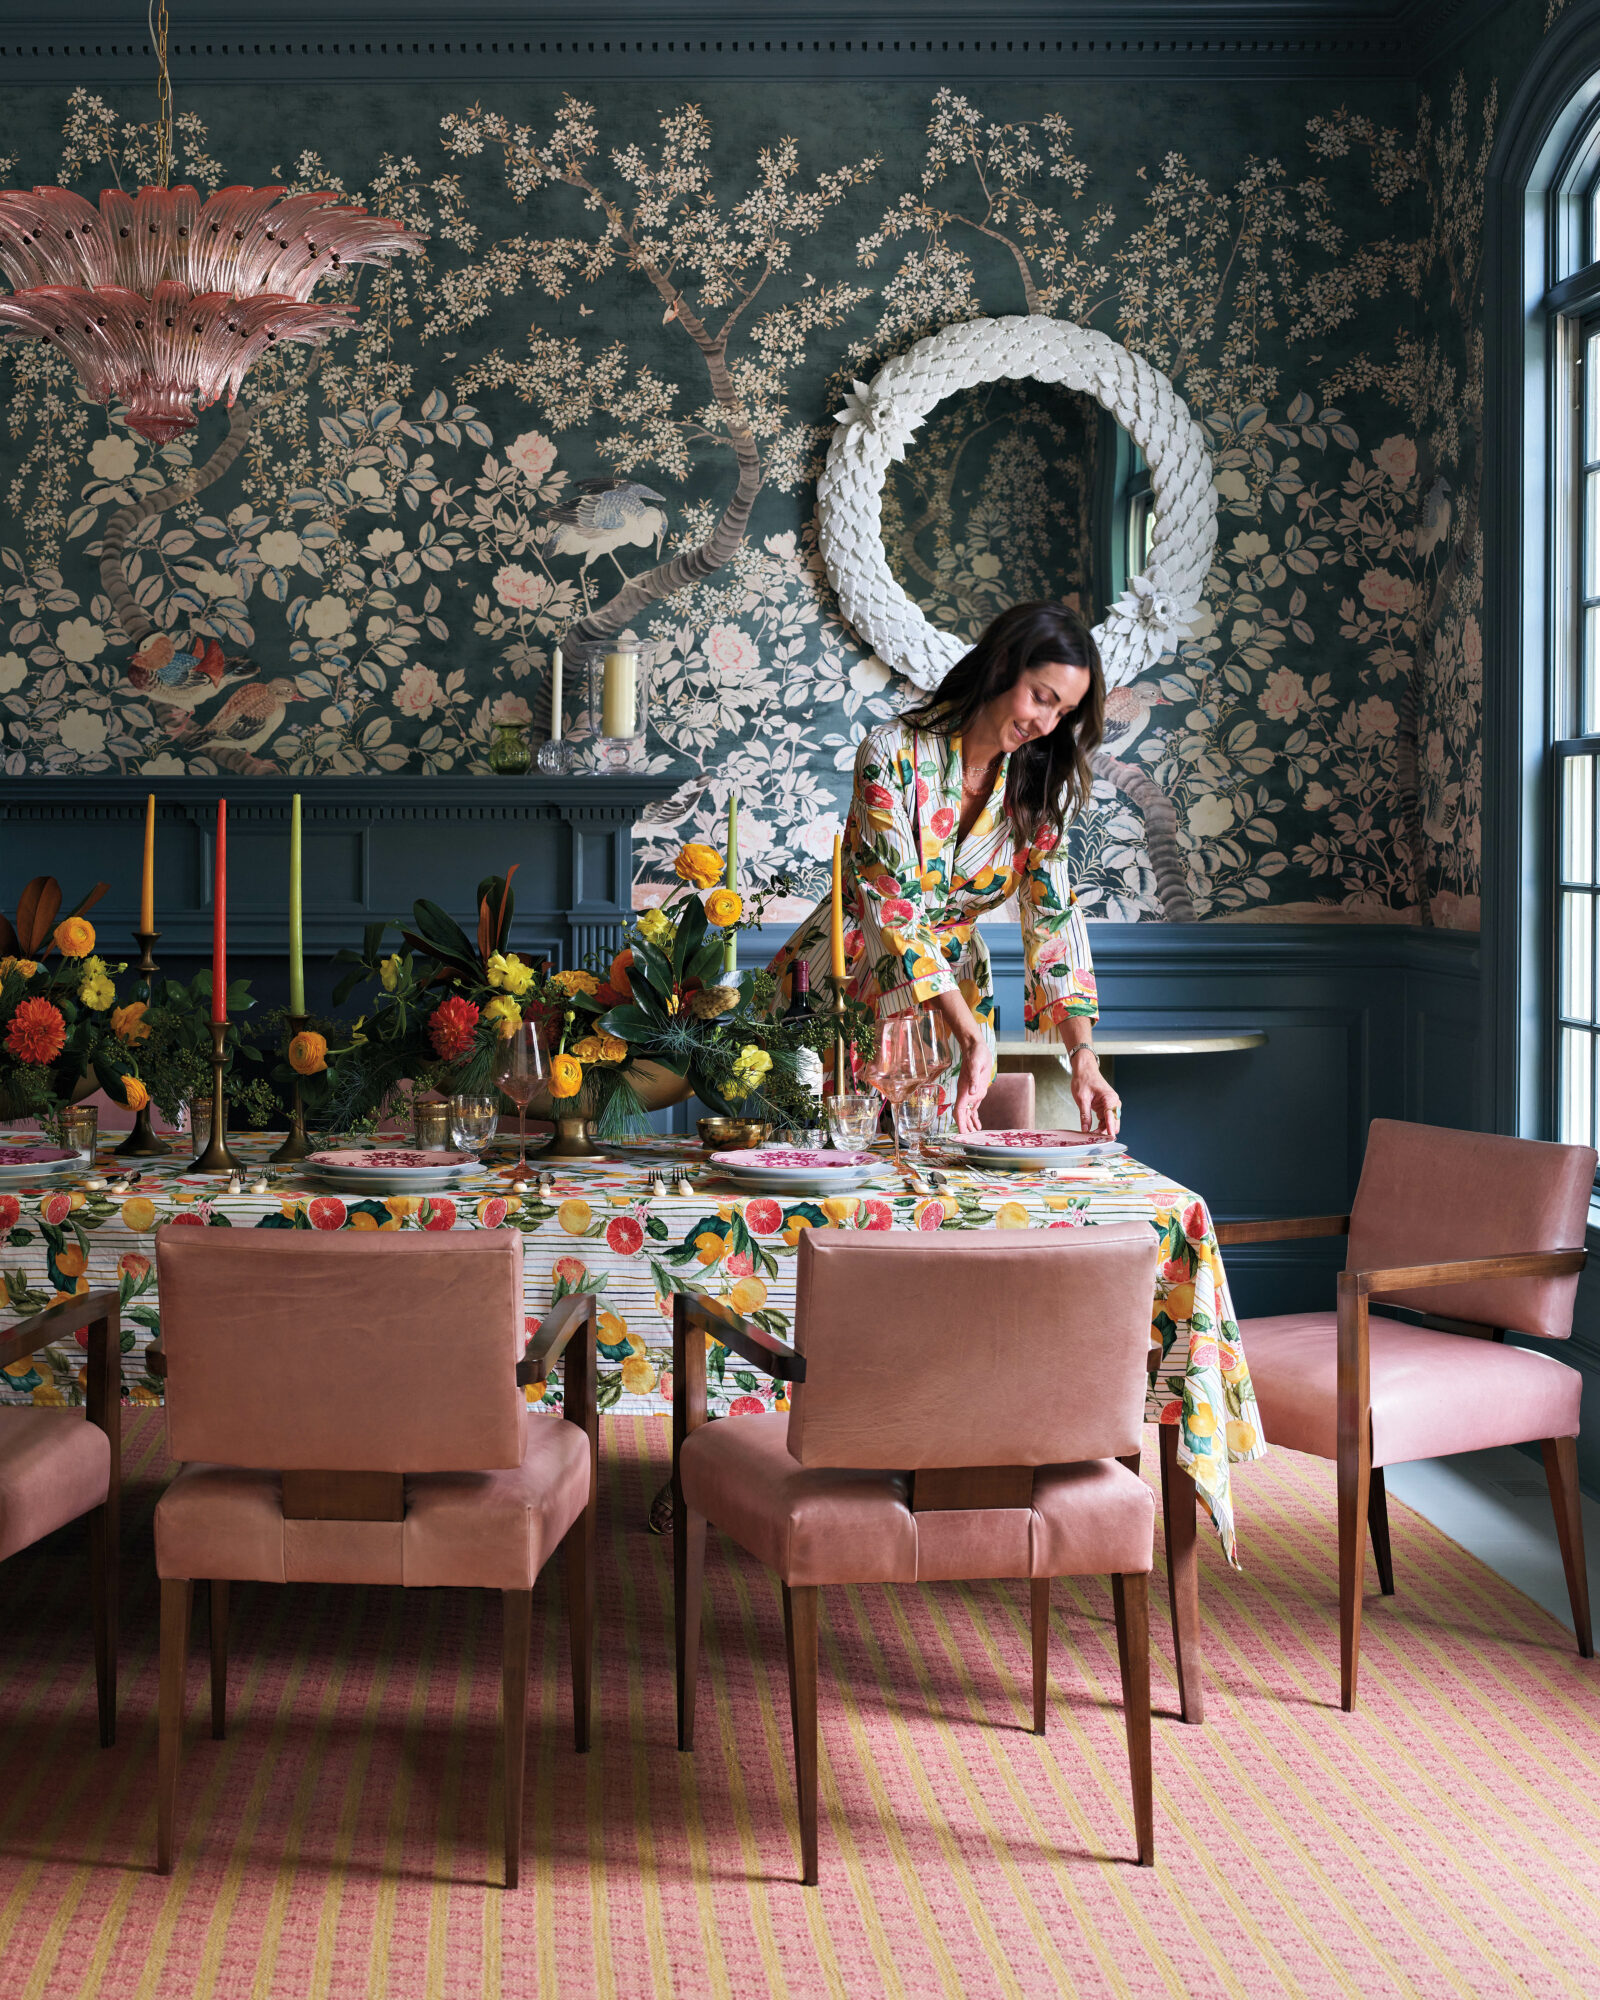 Charlotte Lucas, wearing a citrus-print dress, sets a table with a matching tablecloth and chairs